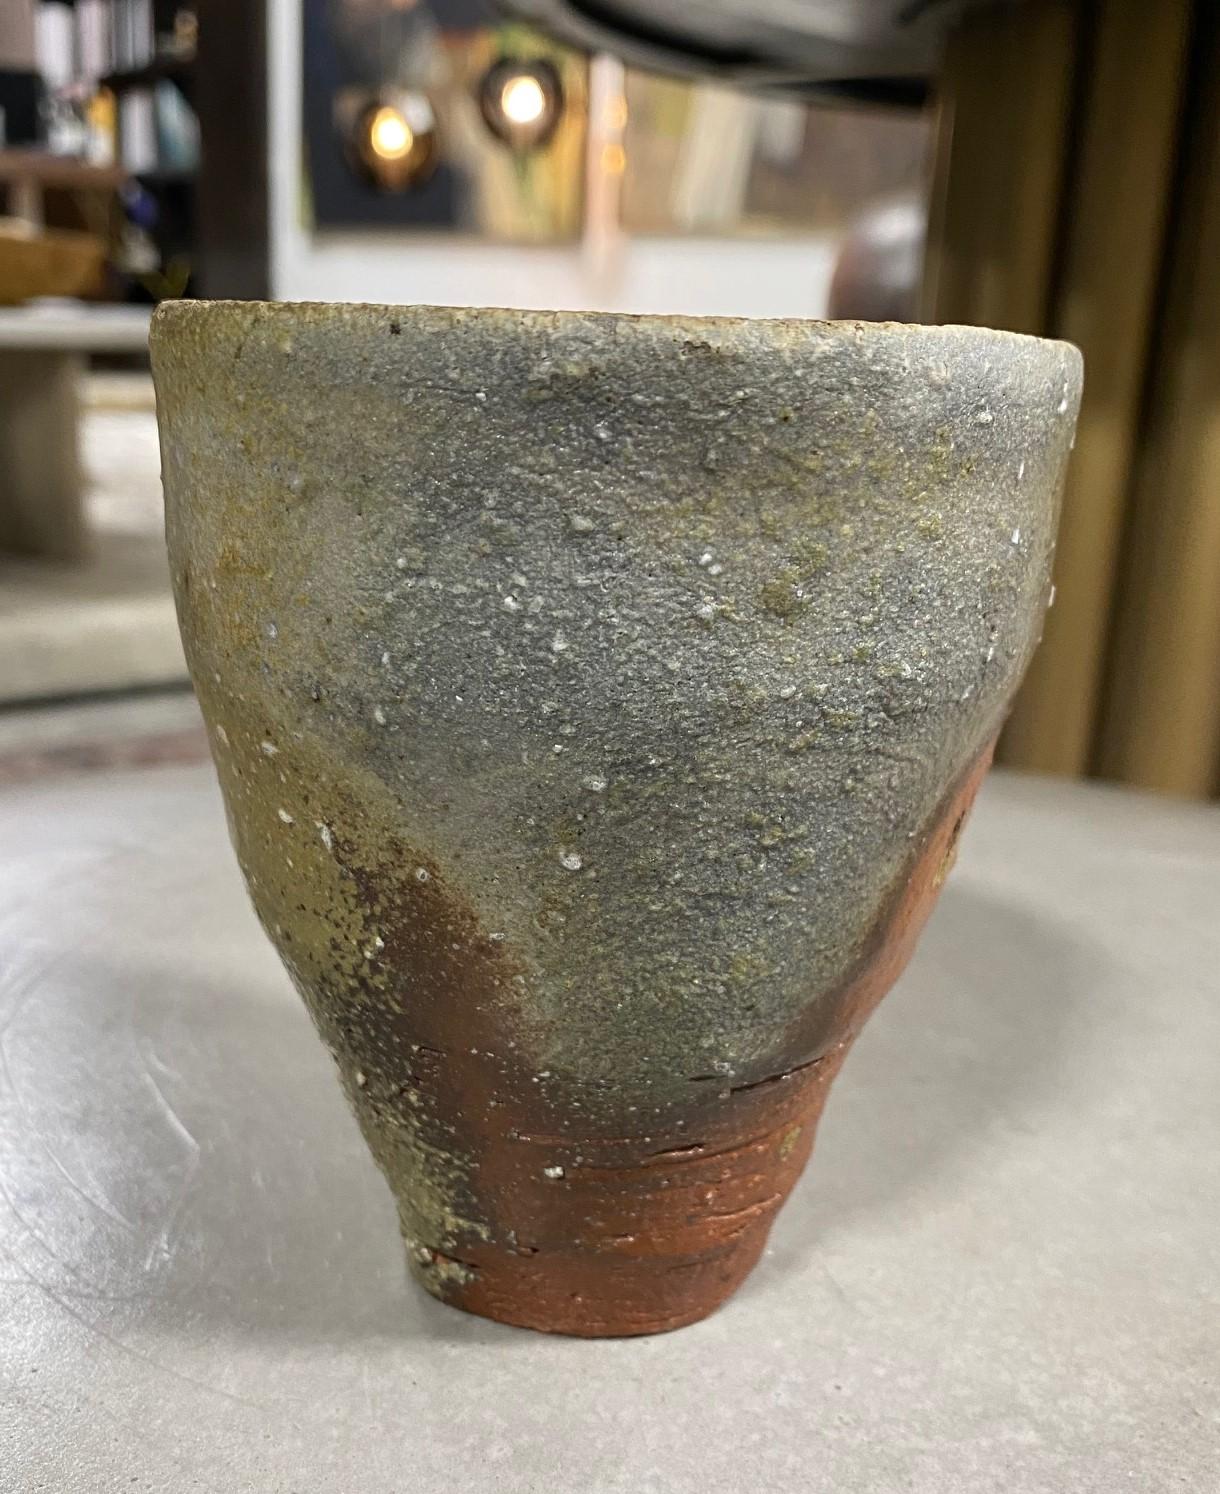 A wonderful gem of a piece. Beautifully fired and colored and featuring a natural, organic ash glaze. 

Japanese Bizen-Yaki pottery which dates back hundreds of years (its heyday was in the 16th century) is recognizable by its rustic quality and